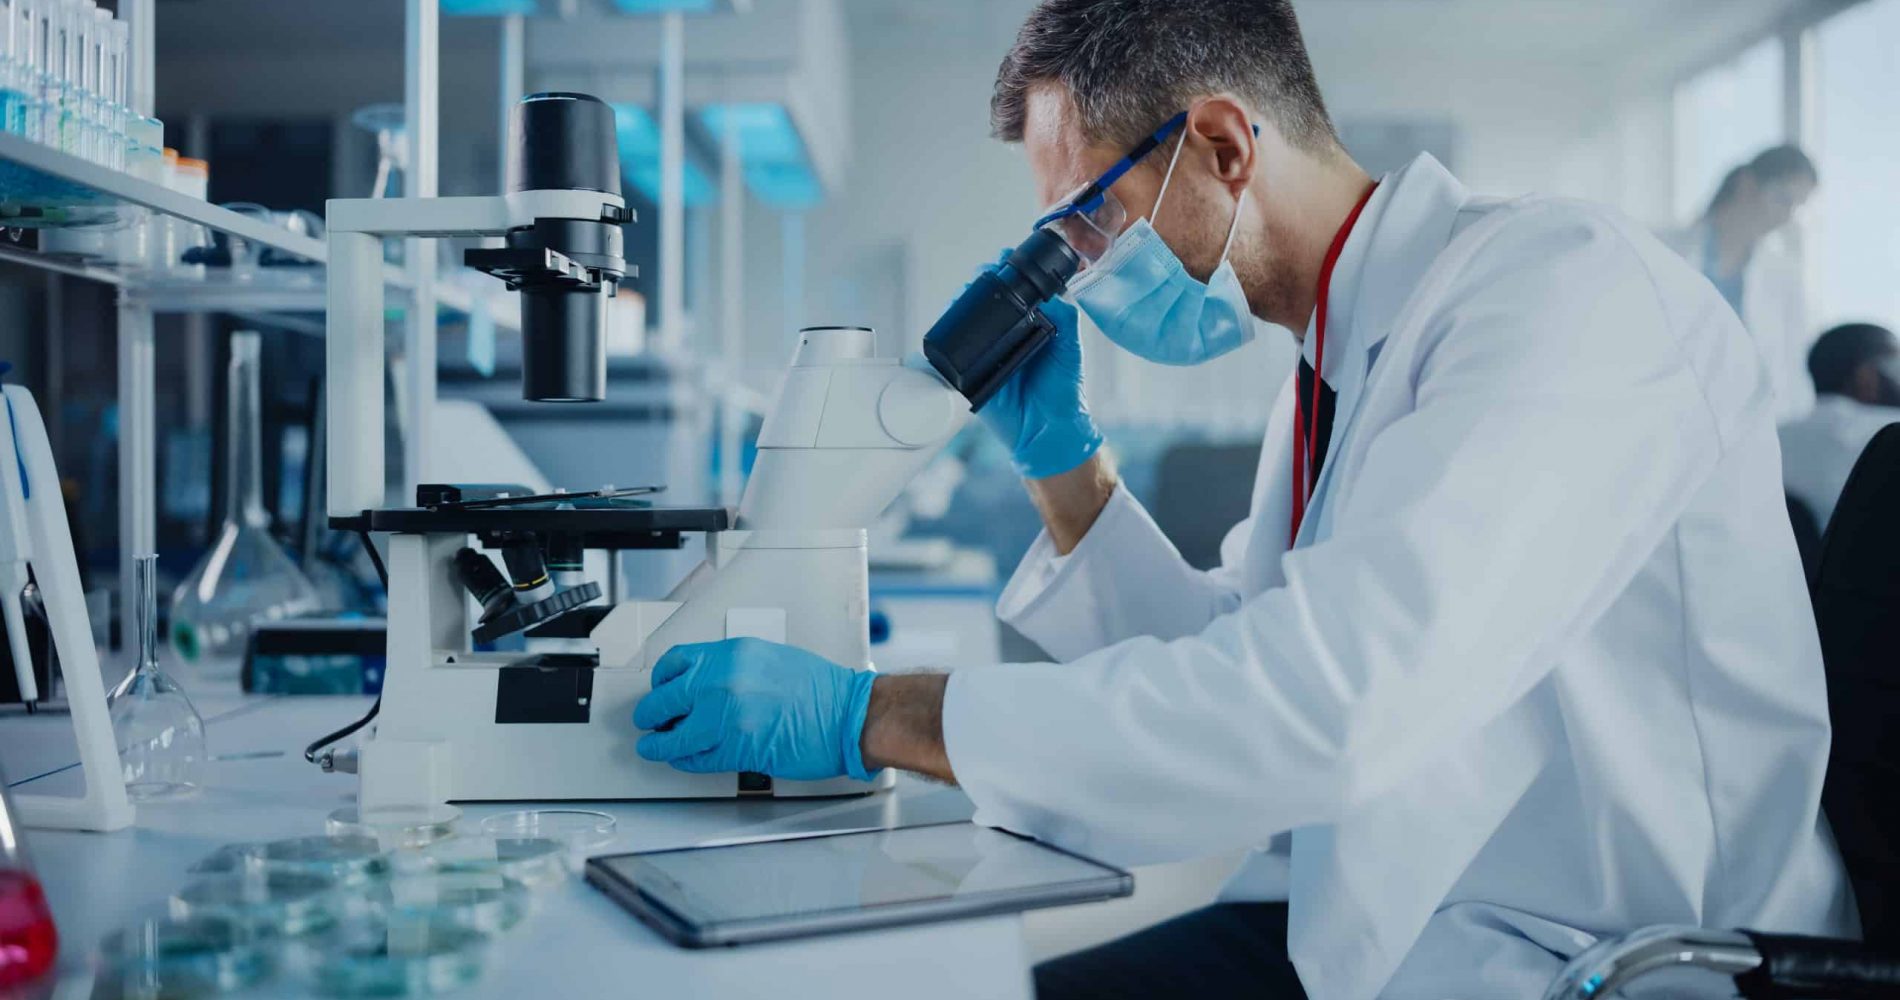 Medical Development Laboratory: Scientist Wearing Face Mask Looking Under Microscope and Using Digital Tablet. Specialists Working on Medicine, Biotechnology Research in Advanced Pharma Lab